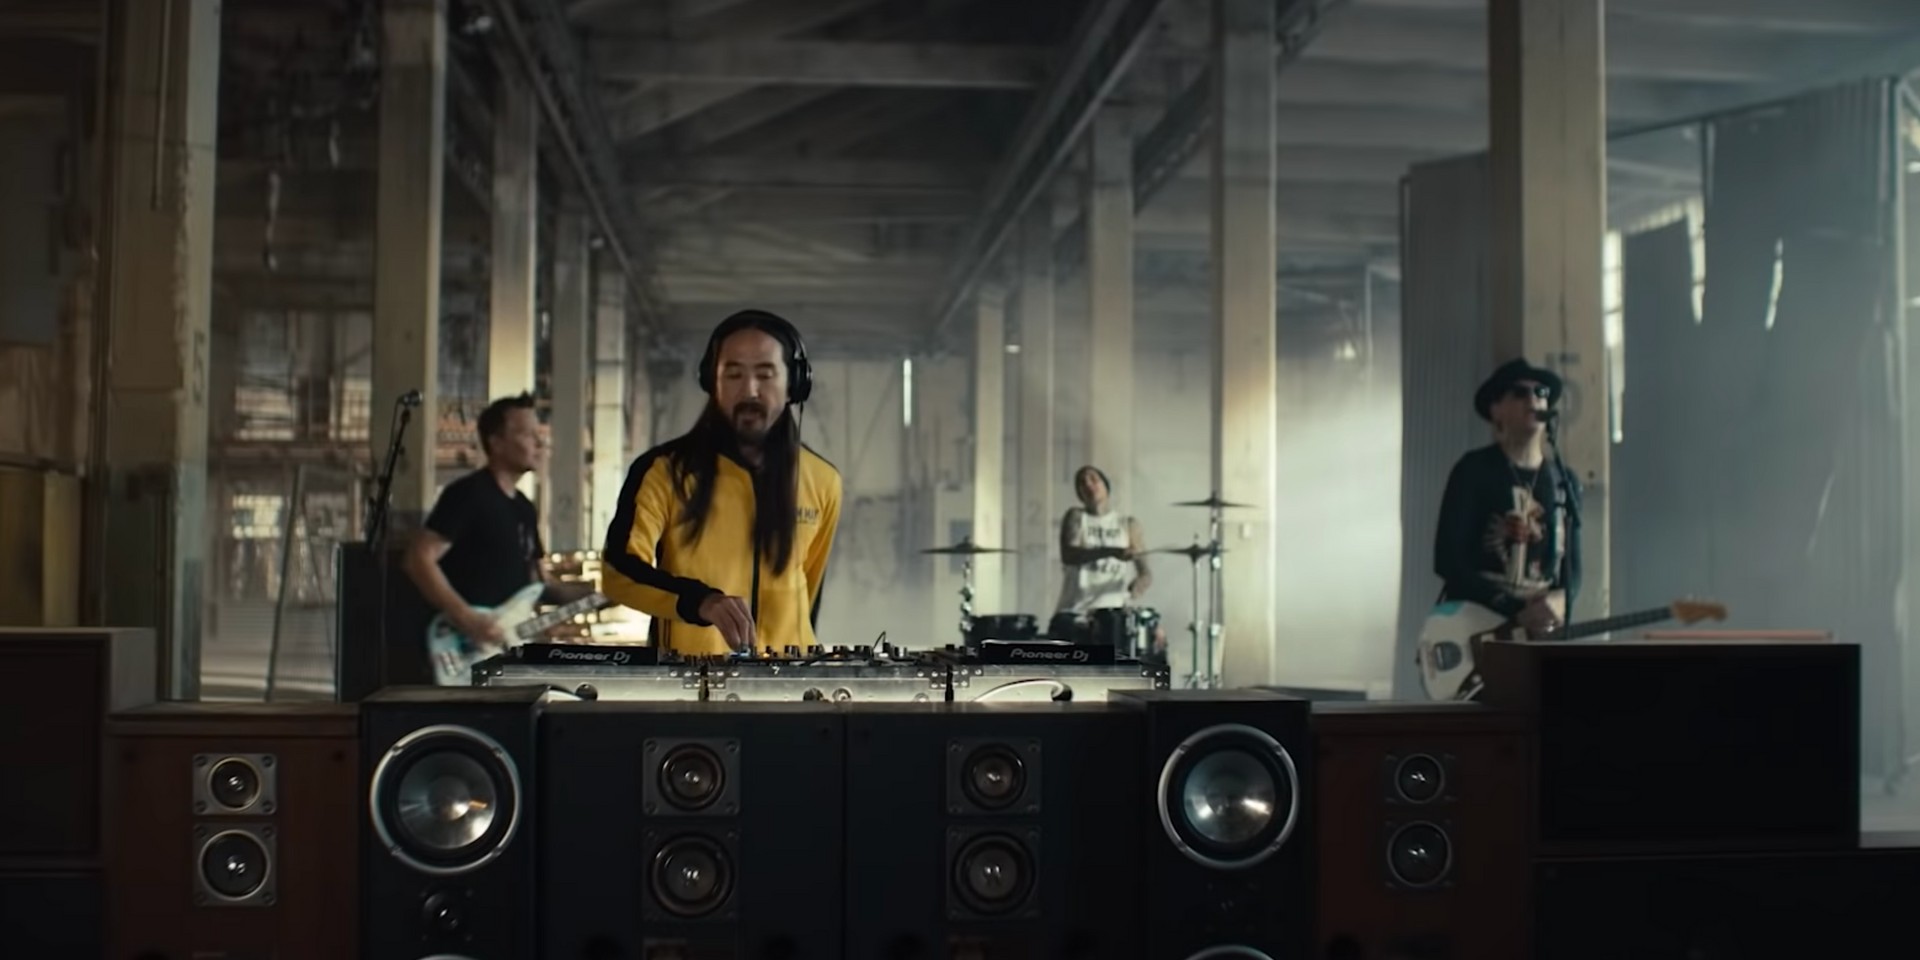 Destruction is central in Steve Aoki and Blink-182's new music video for 'Why Are We So Broken' – watch